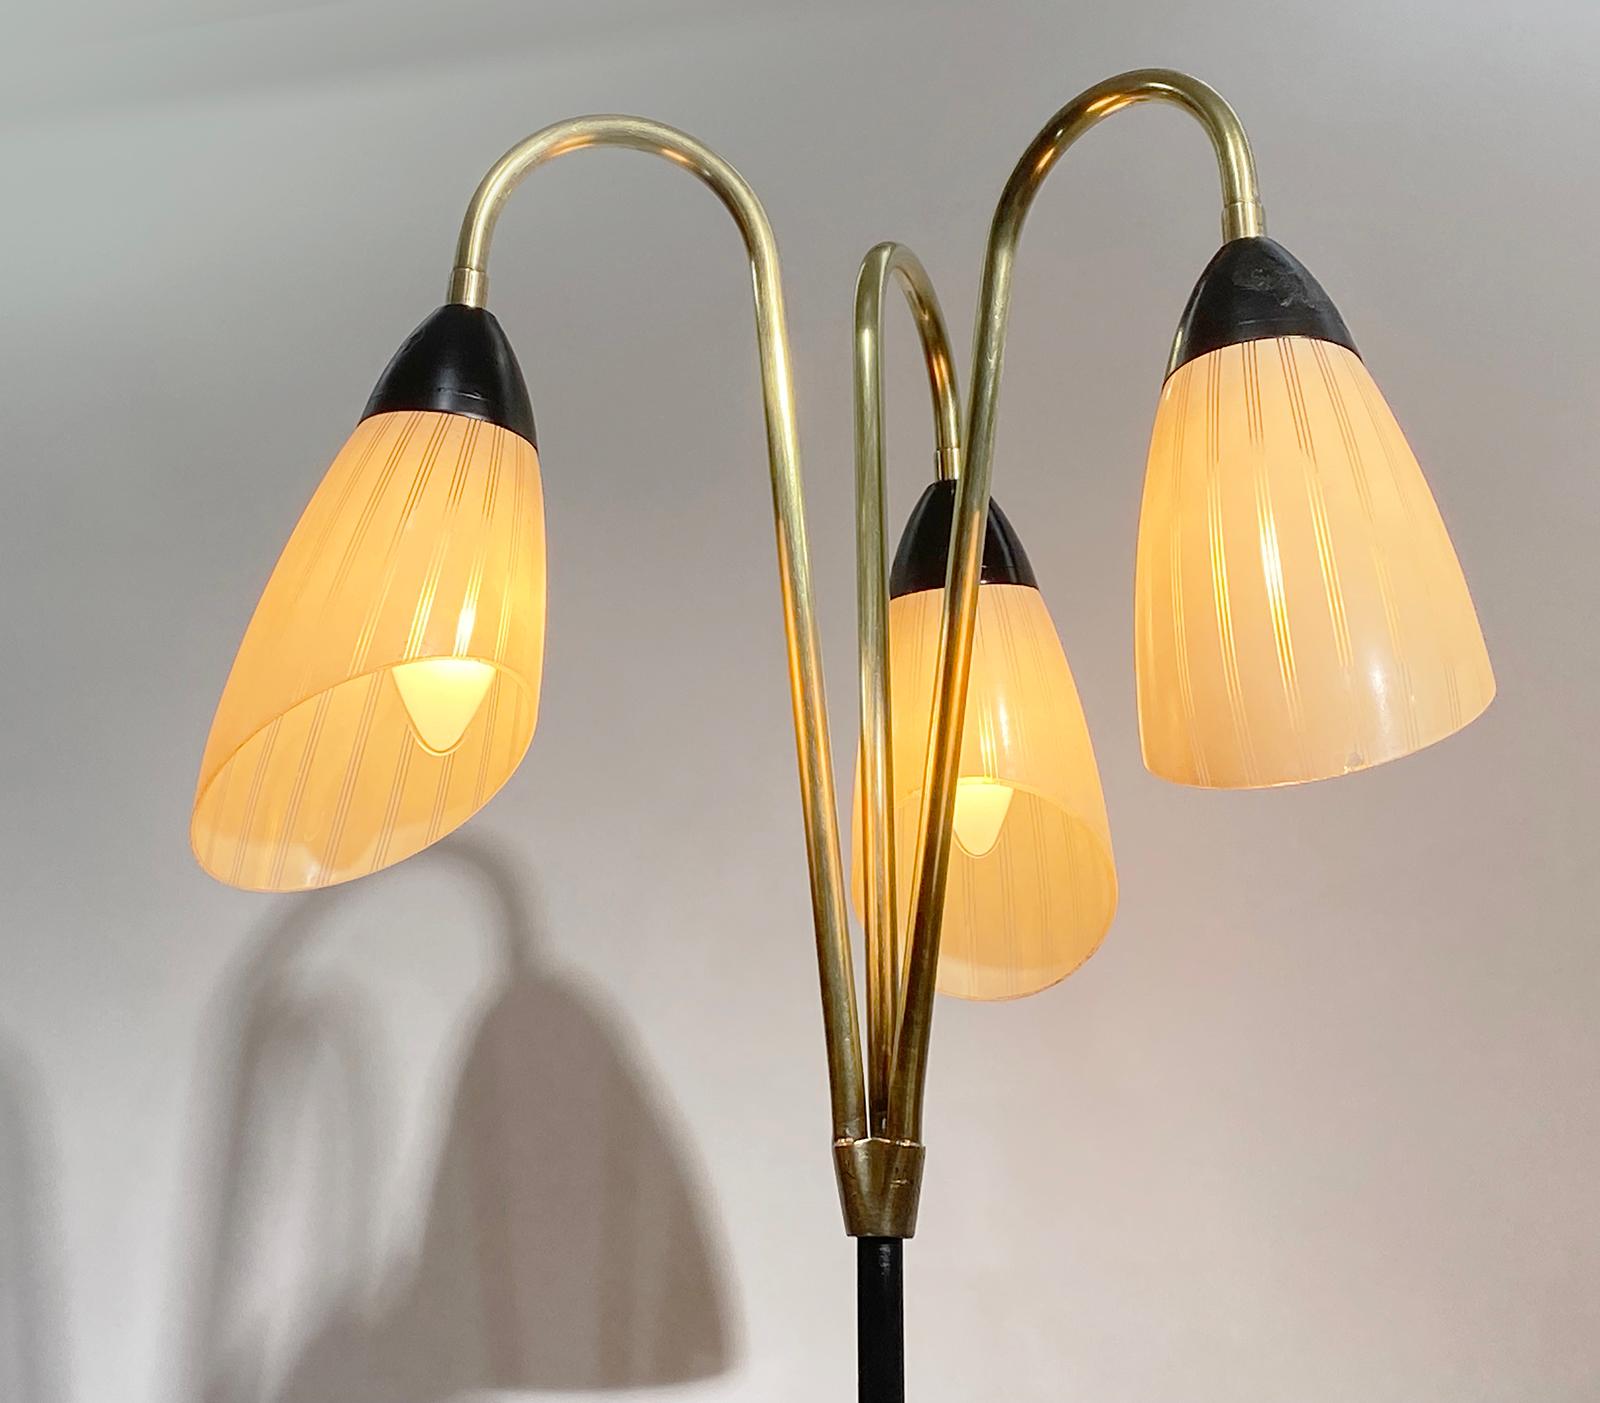 French Brass and Black Metal Floor Lamp with 3 Glass Lights, 1950s For Sale 1